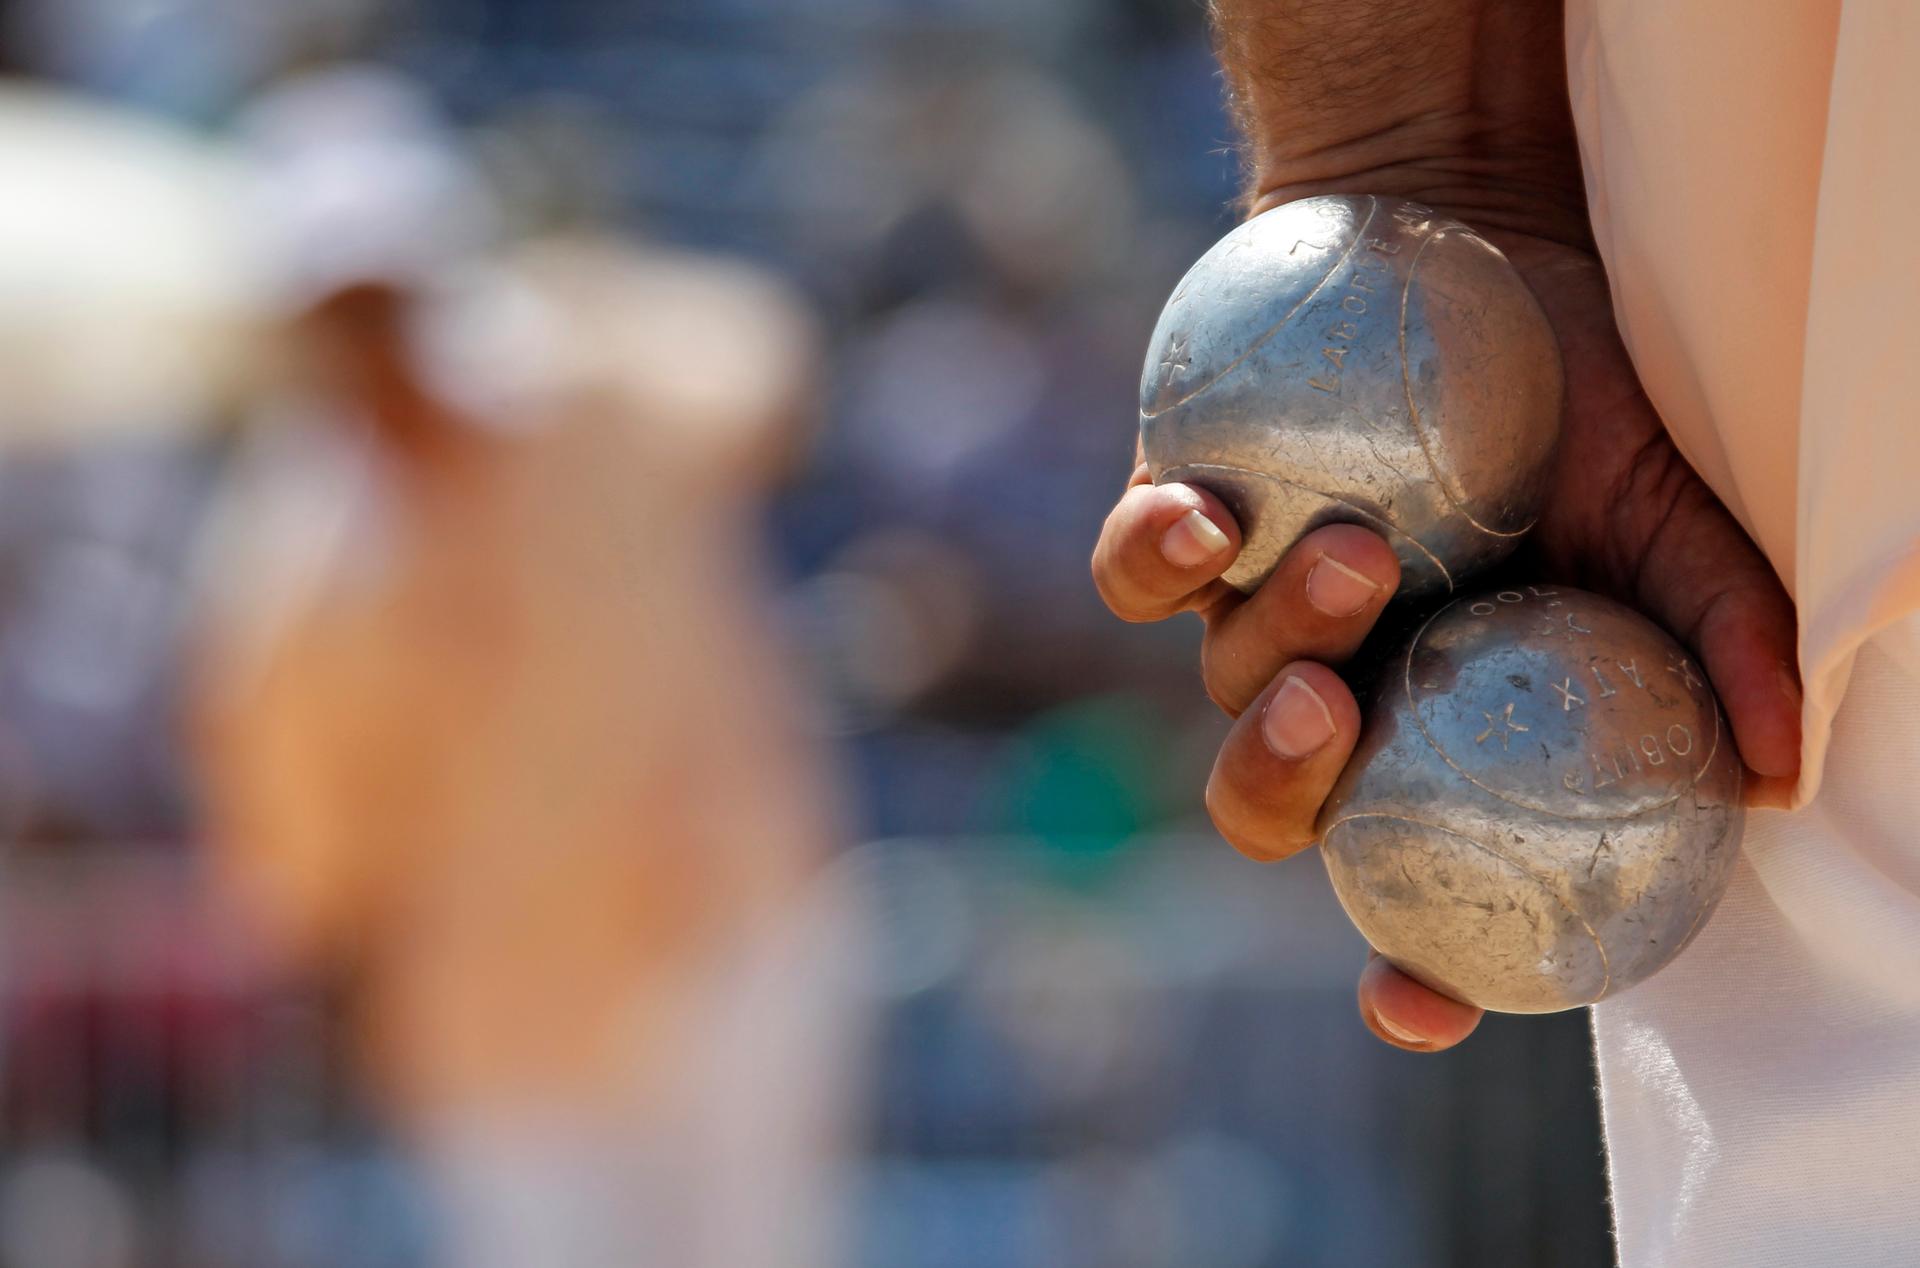 A player holds petanque bowls during the semi-final of the "Mondial La Marseillaise de Petanque" in Marseille July 8, 2010.